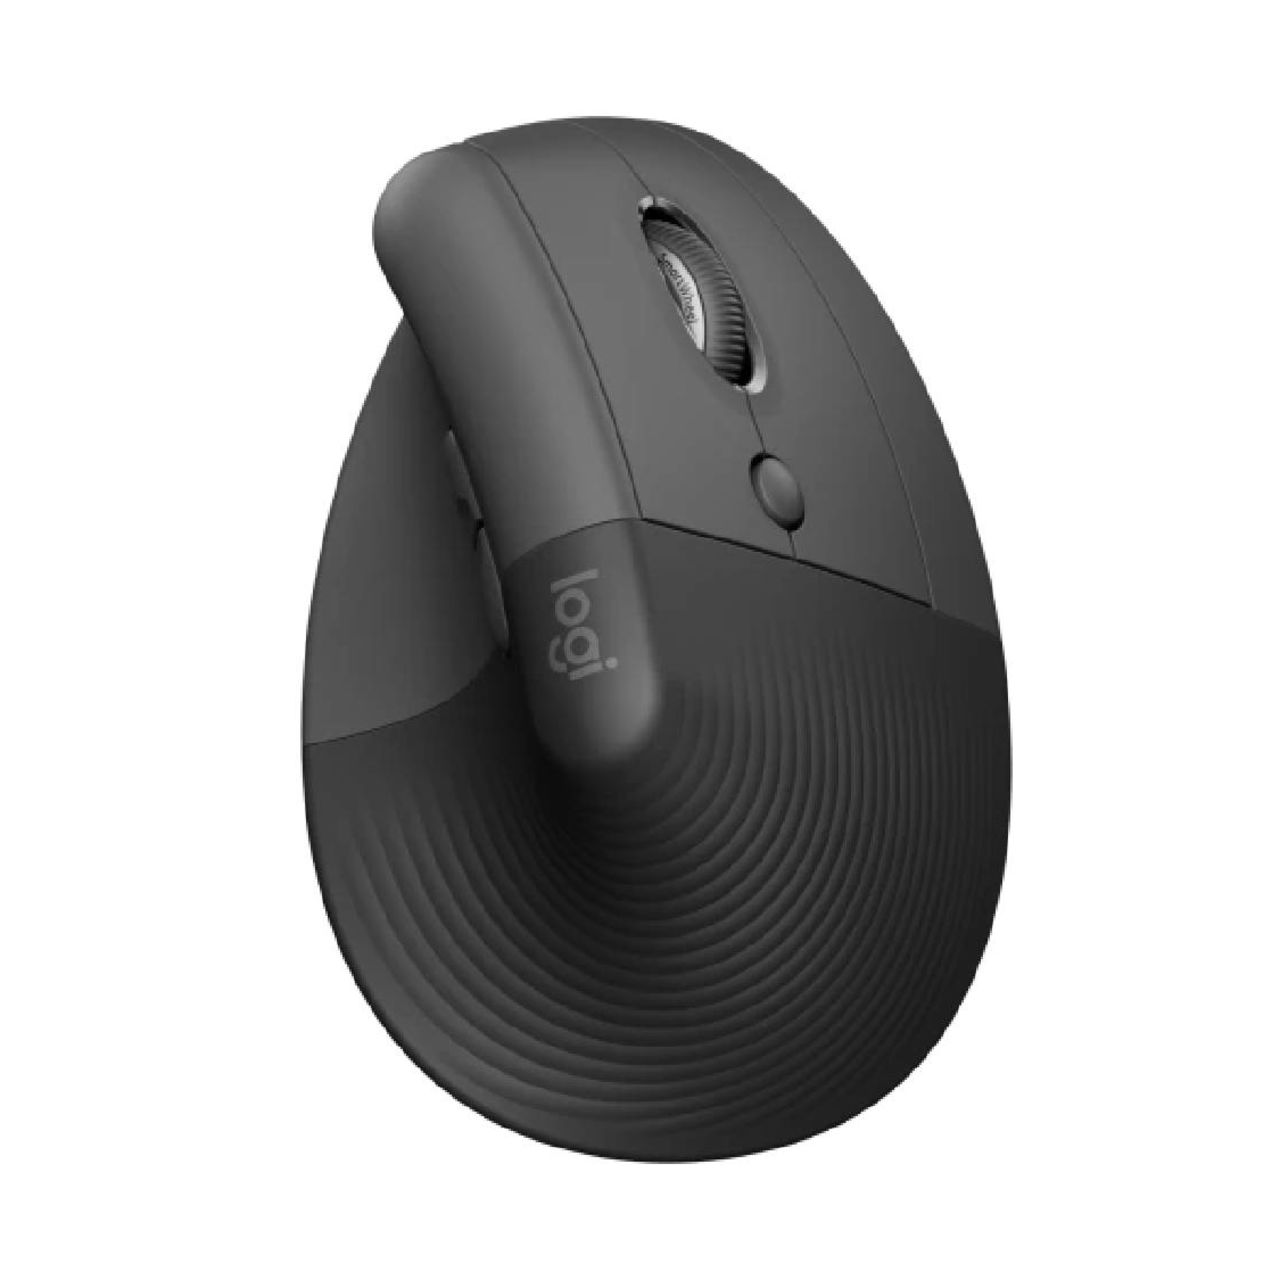 Logitech Lift: New Vertical Mouse Is Smaller and, Yes, More Ergonomic - CNET